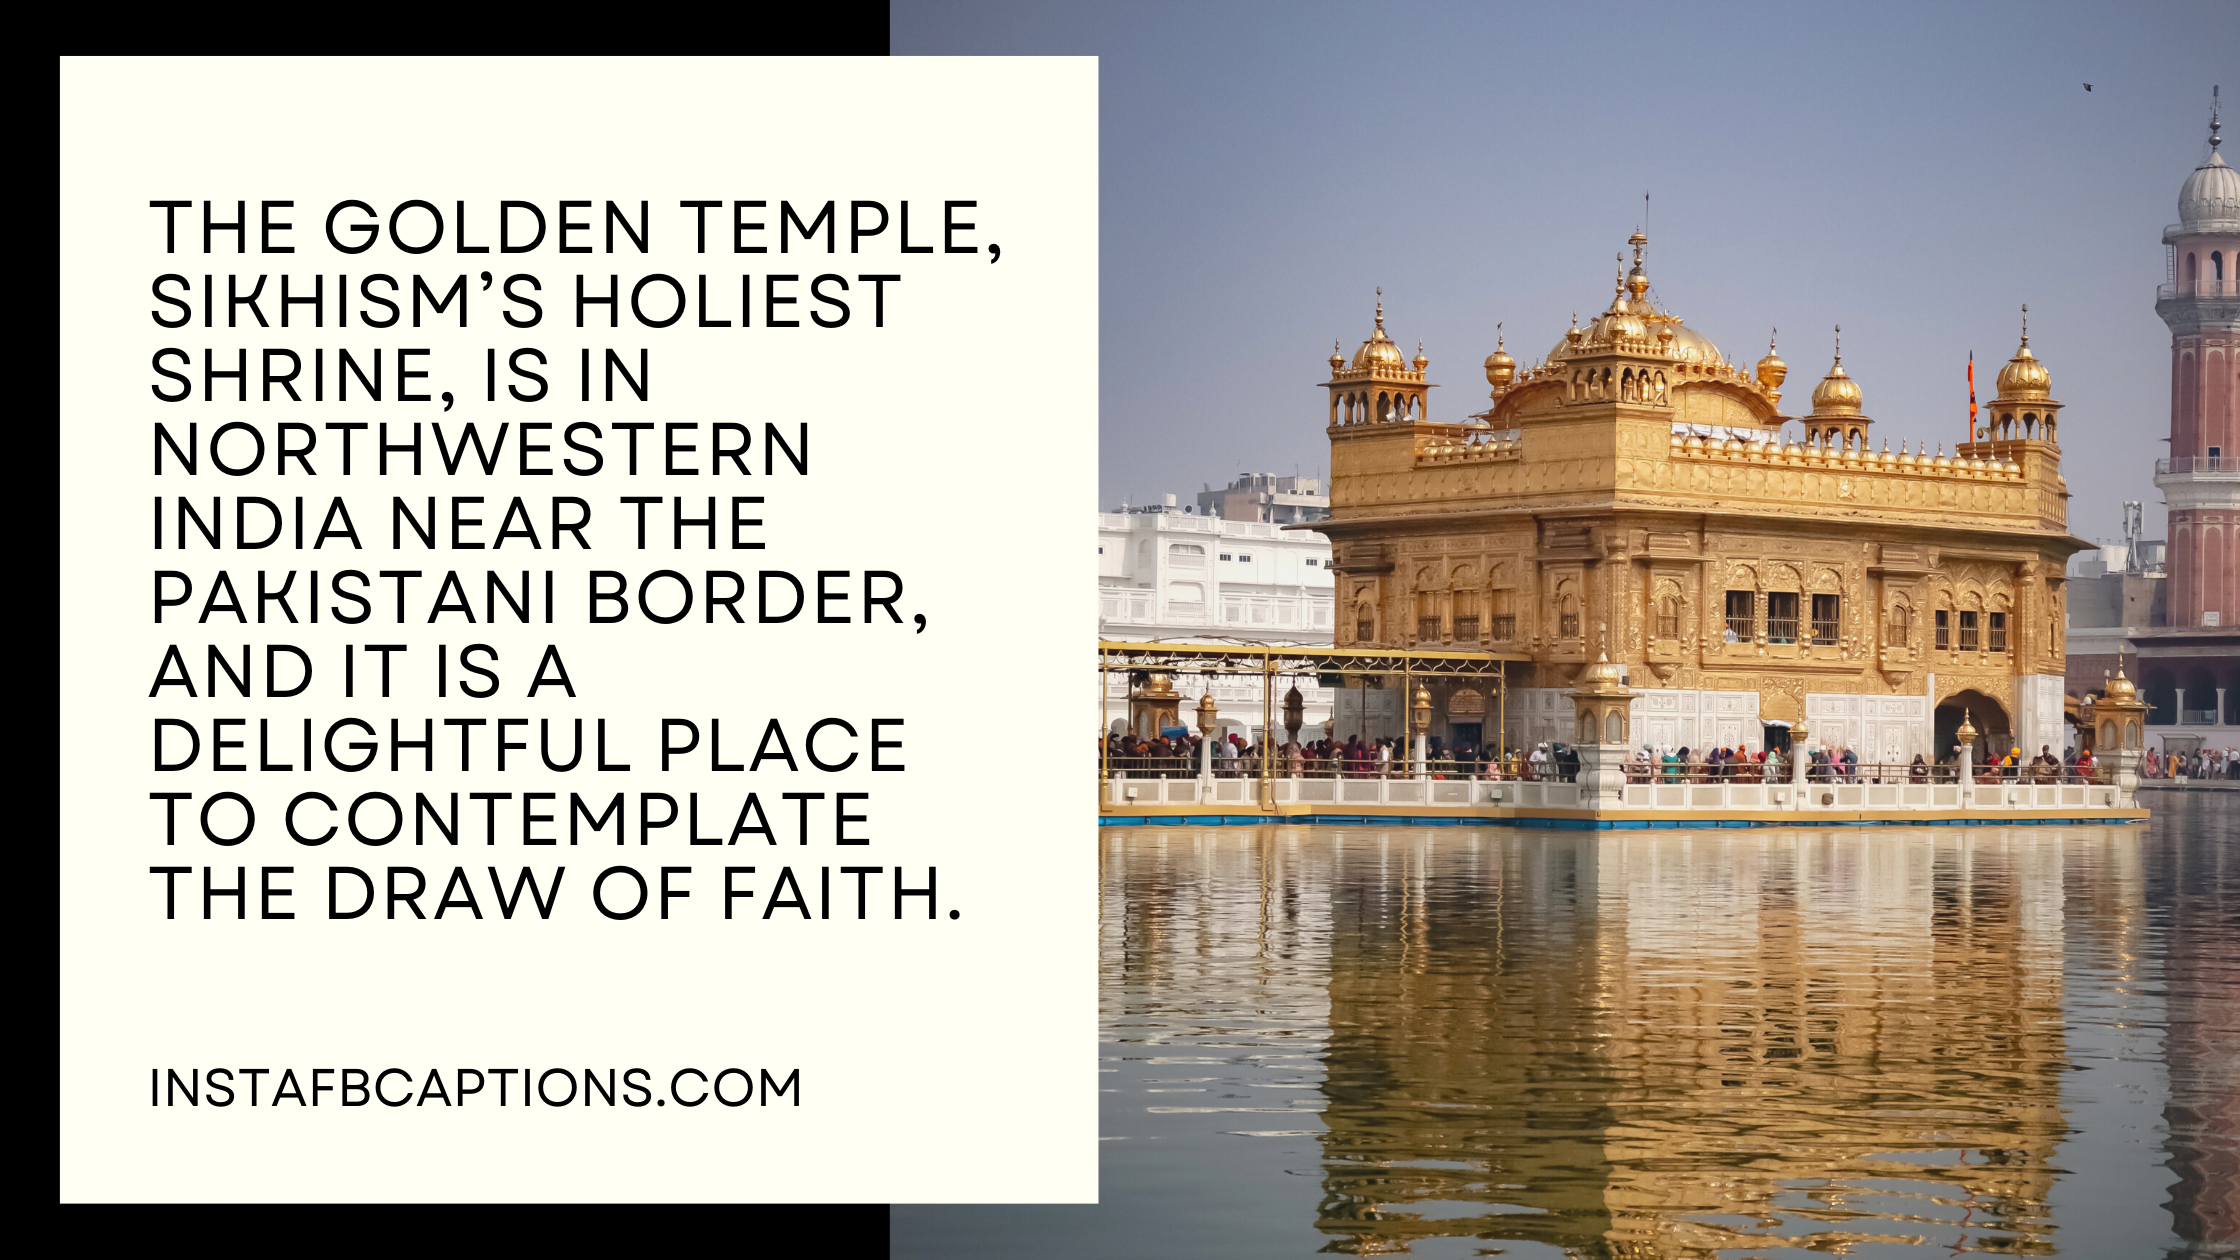 The Golden Temple, Sikhism’s holiest shrine, is in northwestern India near the Pakistani border, and it is a delightful place to contemplate the draw of faith.  - Golden Temple Captions and Quotes  - 95+ Temple Photo Instagram Captions, Quotes &#038; Hashtags 2023